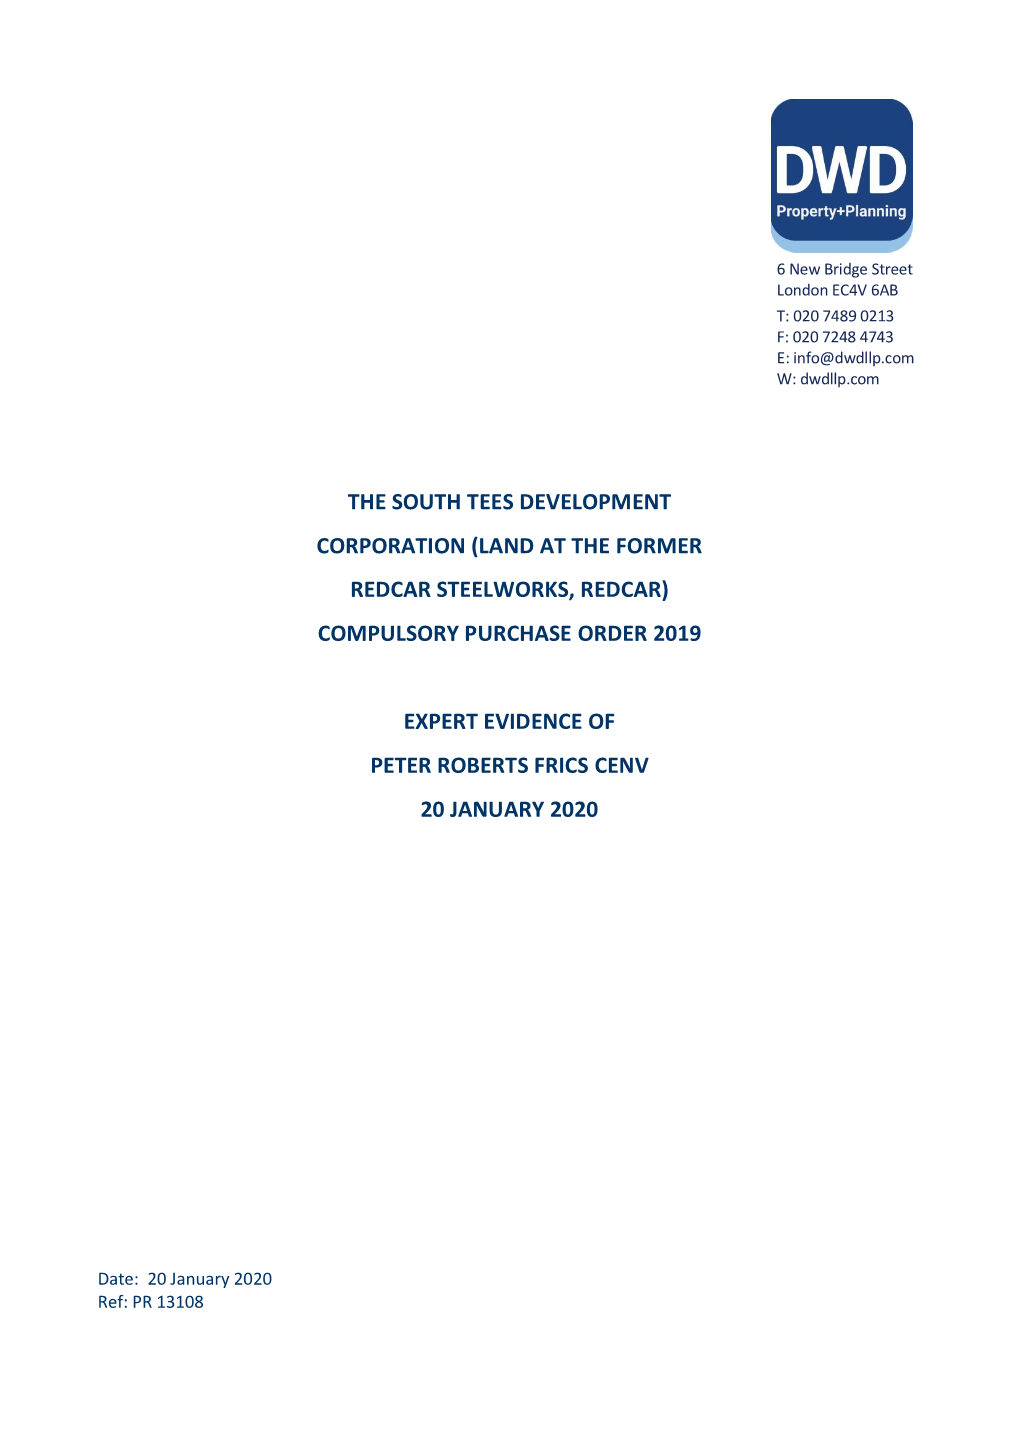 The South Tees Development Corporation (Land at the Former Redcar Steelworks, Redcar) Compulsory Purchase Order 2019